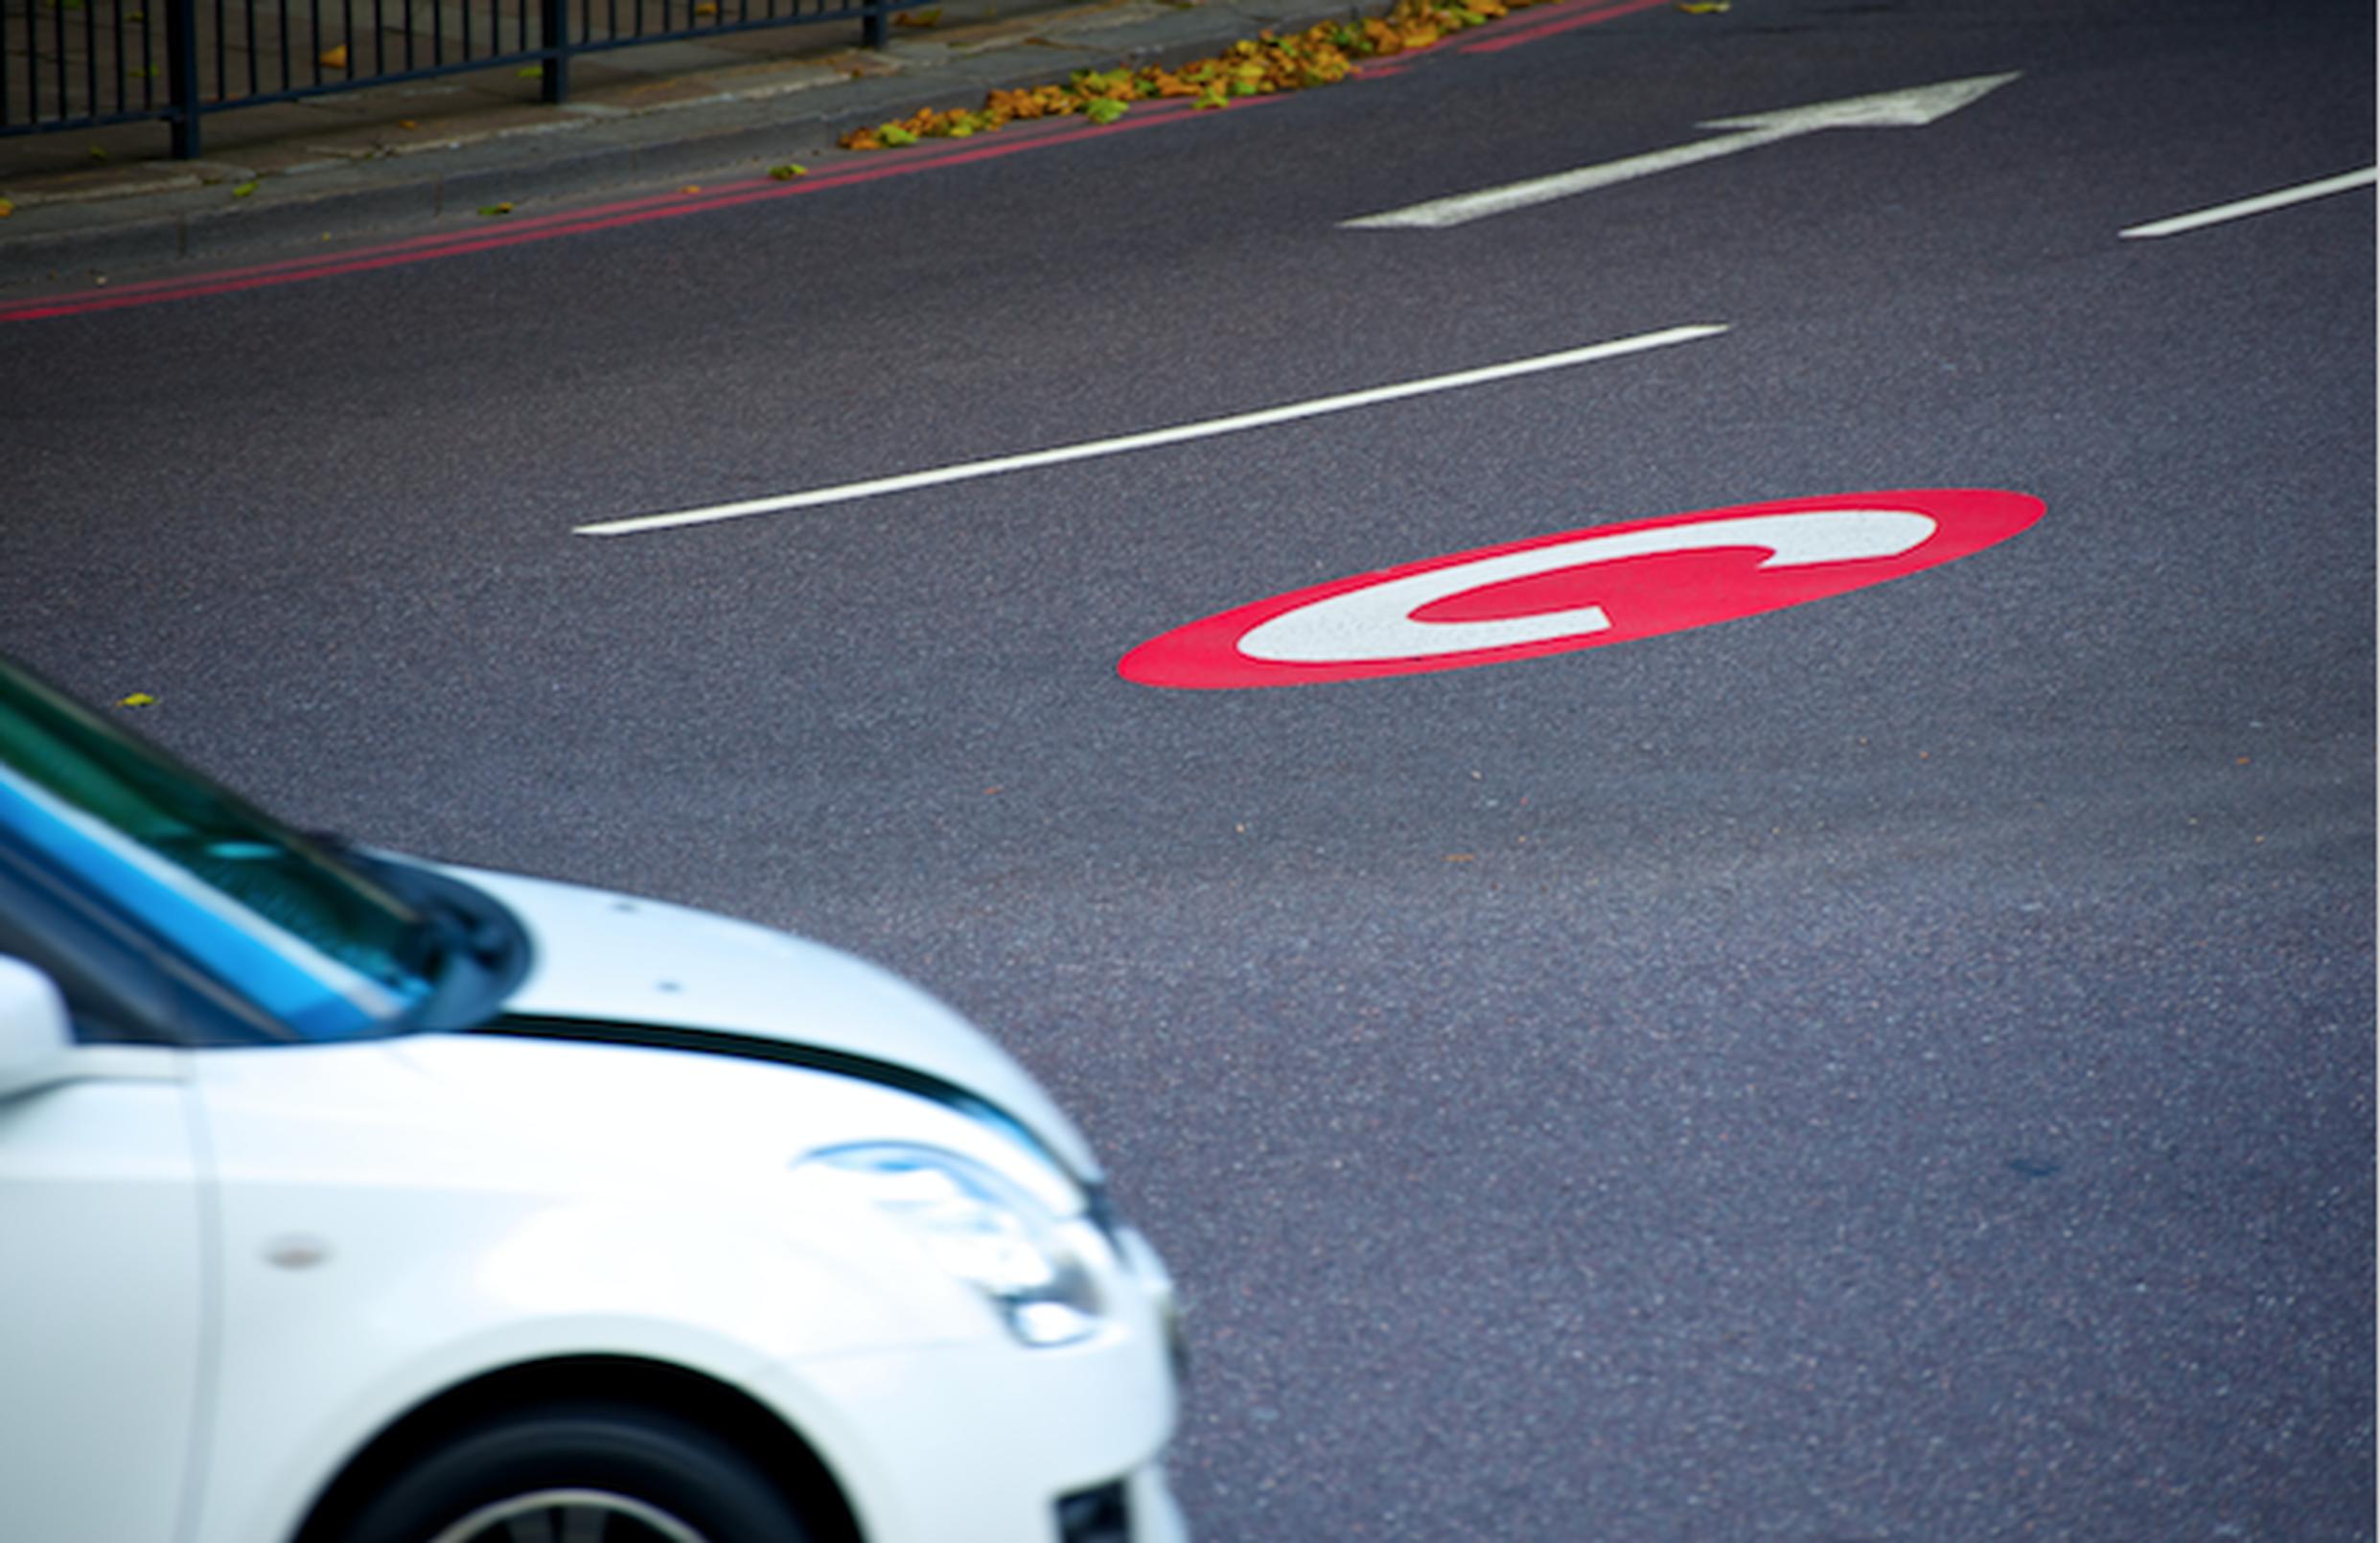 New Congestion Charge measures come into effect on 22 June